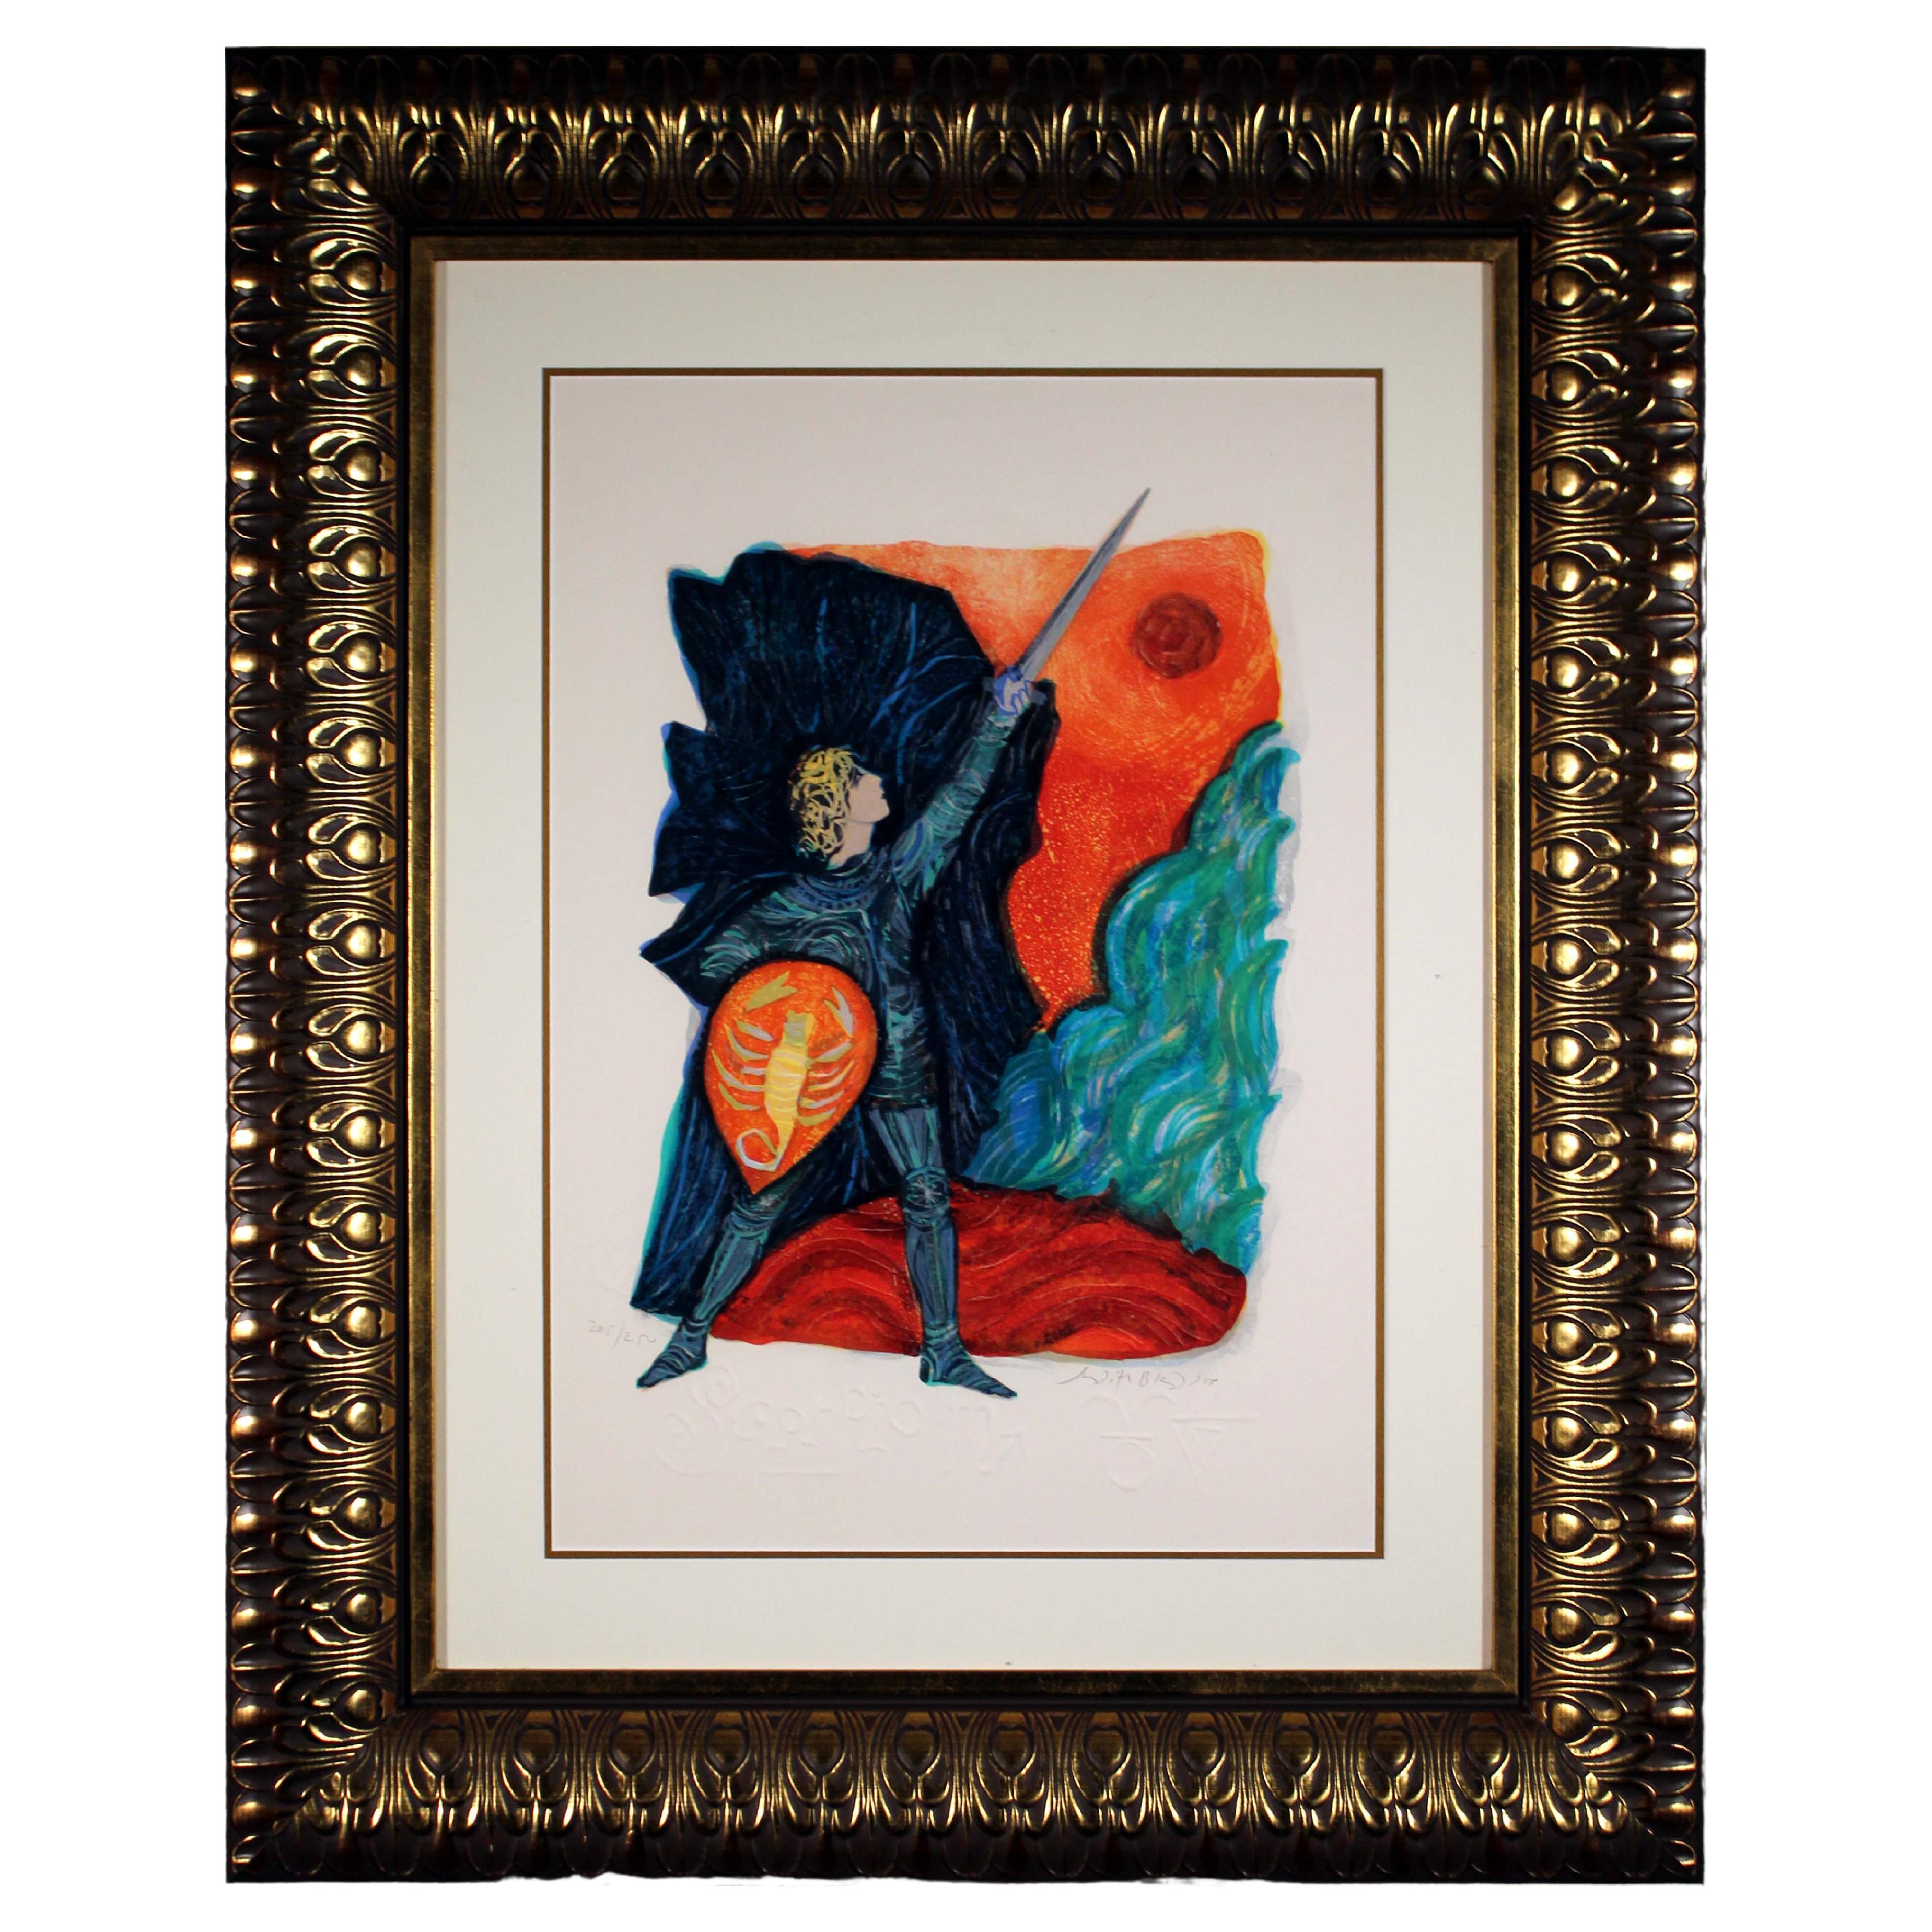 Judith Bledsoe Scorpio Zodiac Signed Contemporary Lithograph 205/250 Framed For Sale